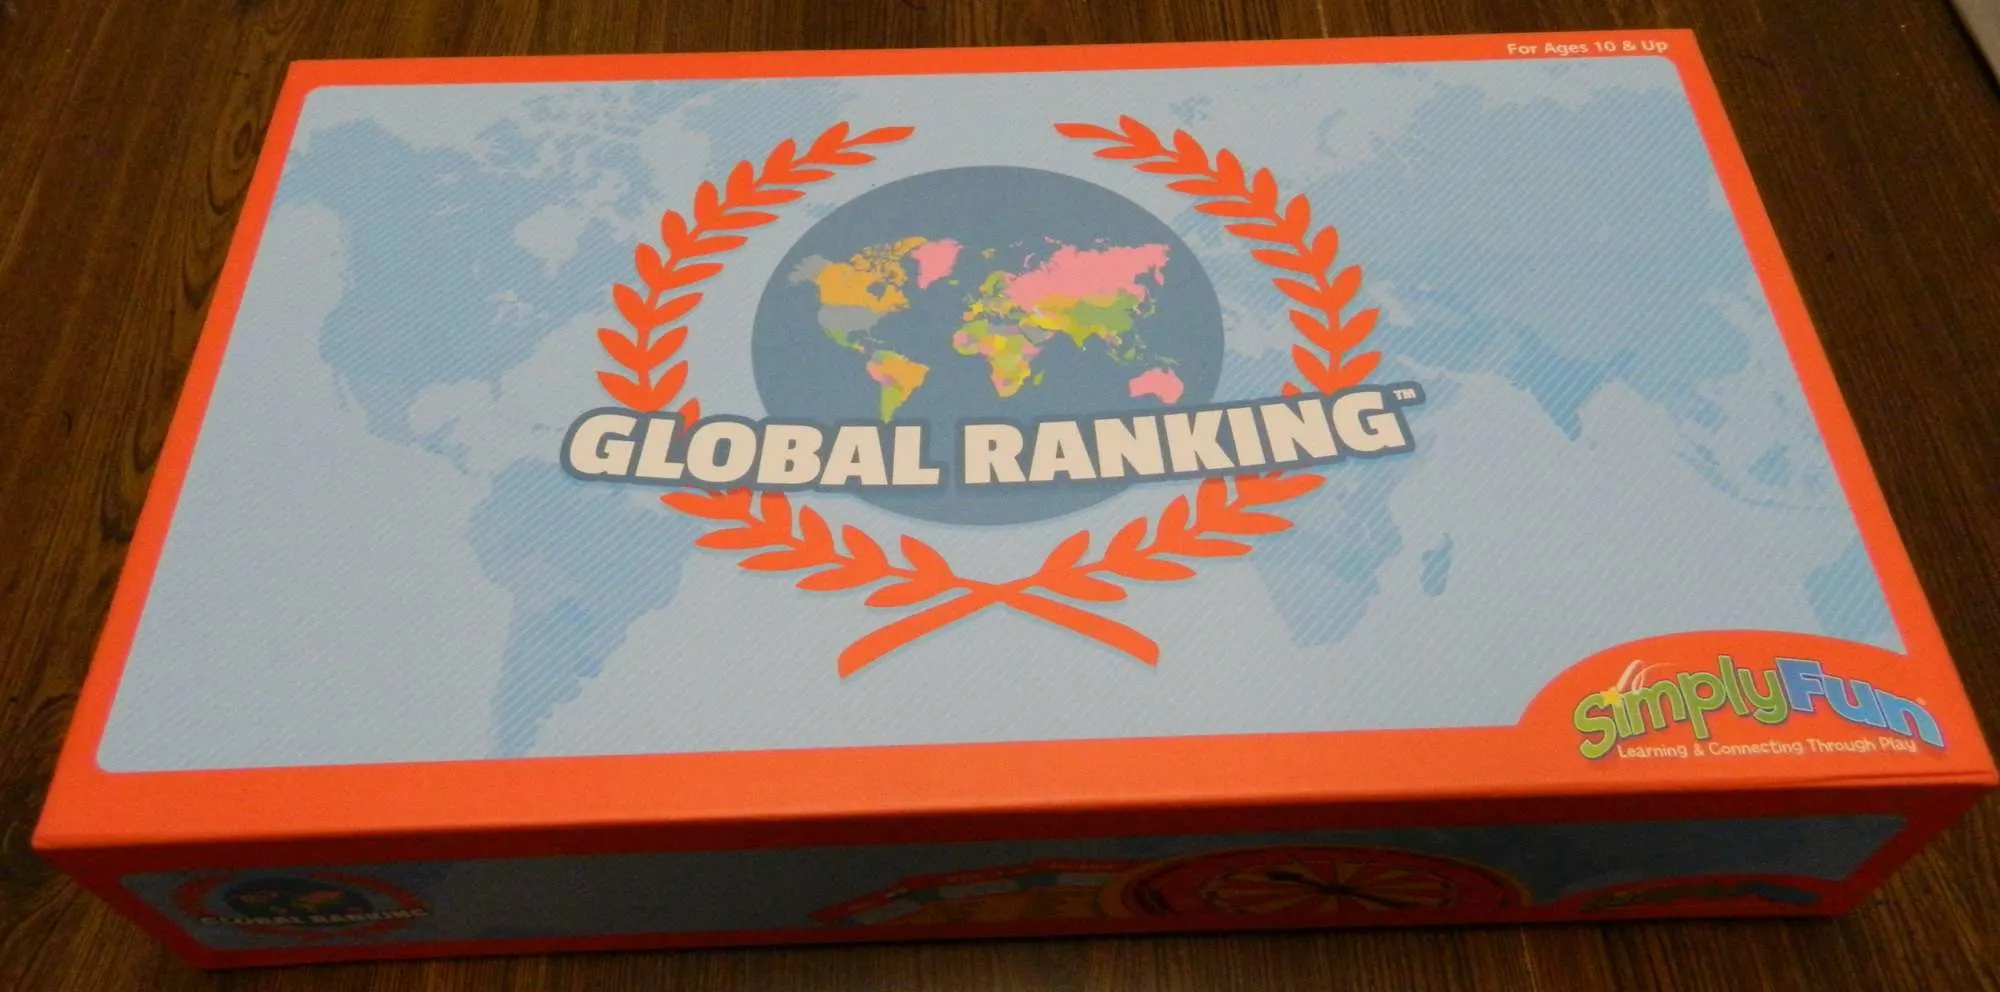 Box for Global Ranking